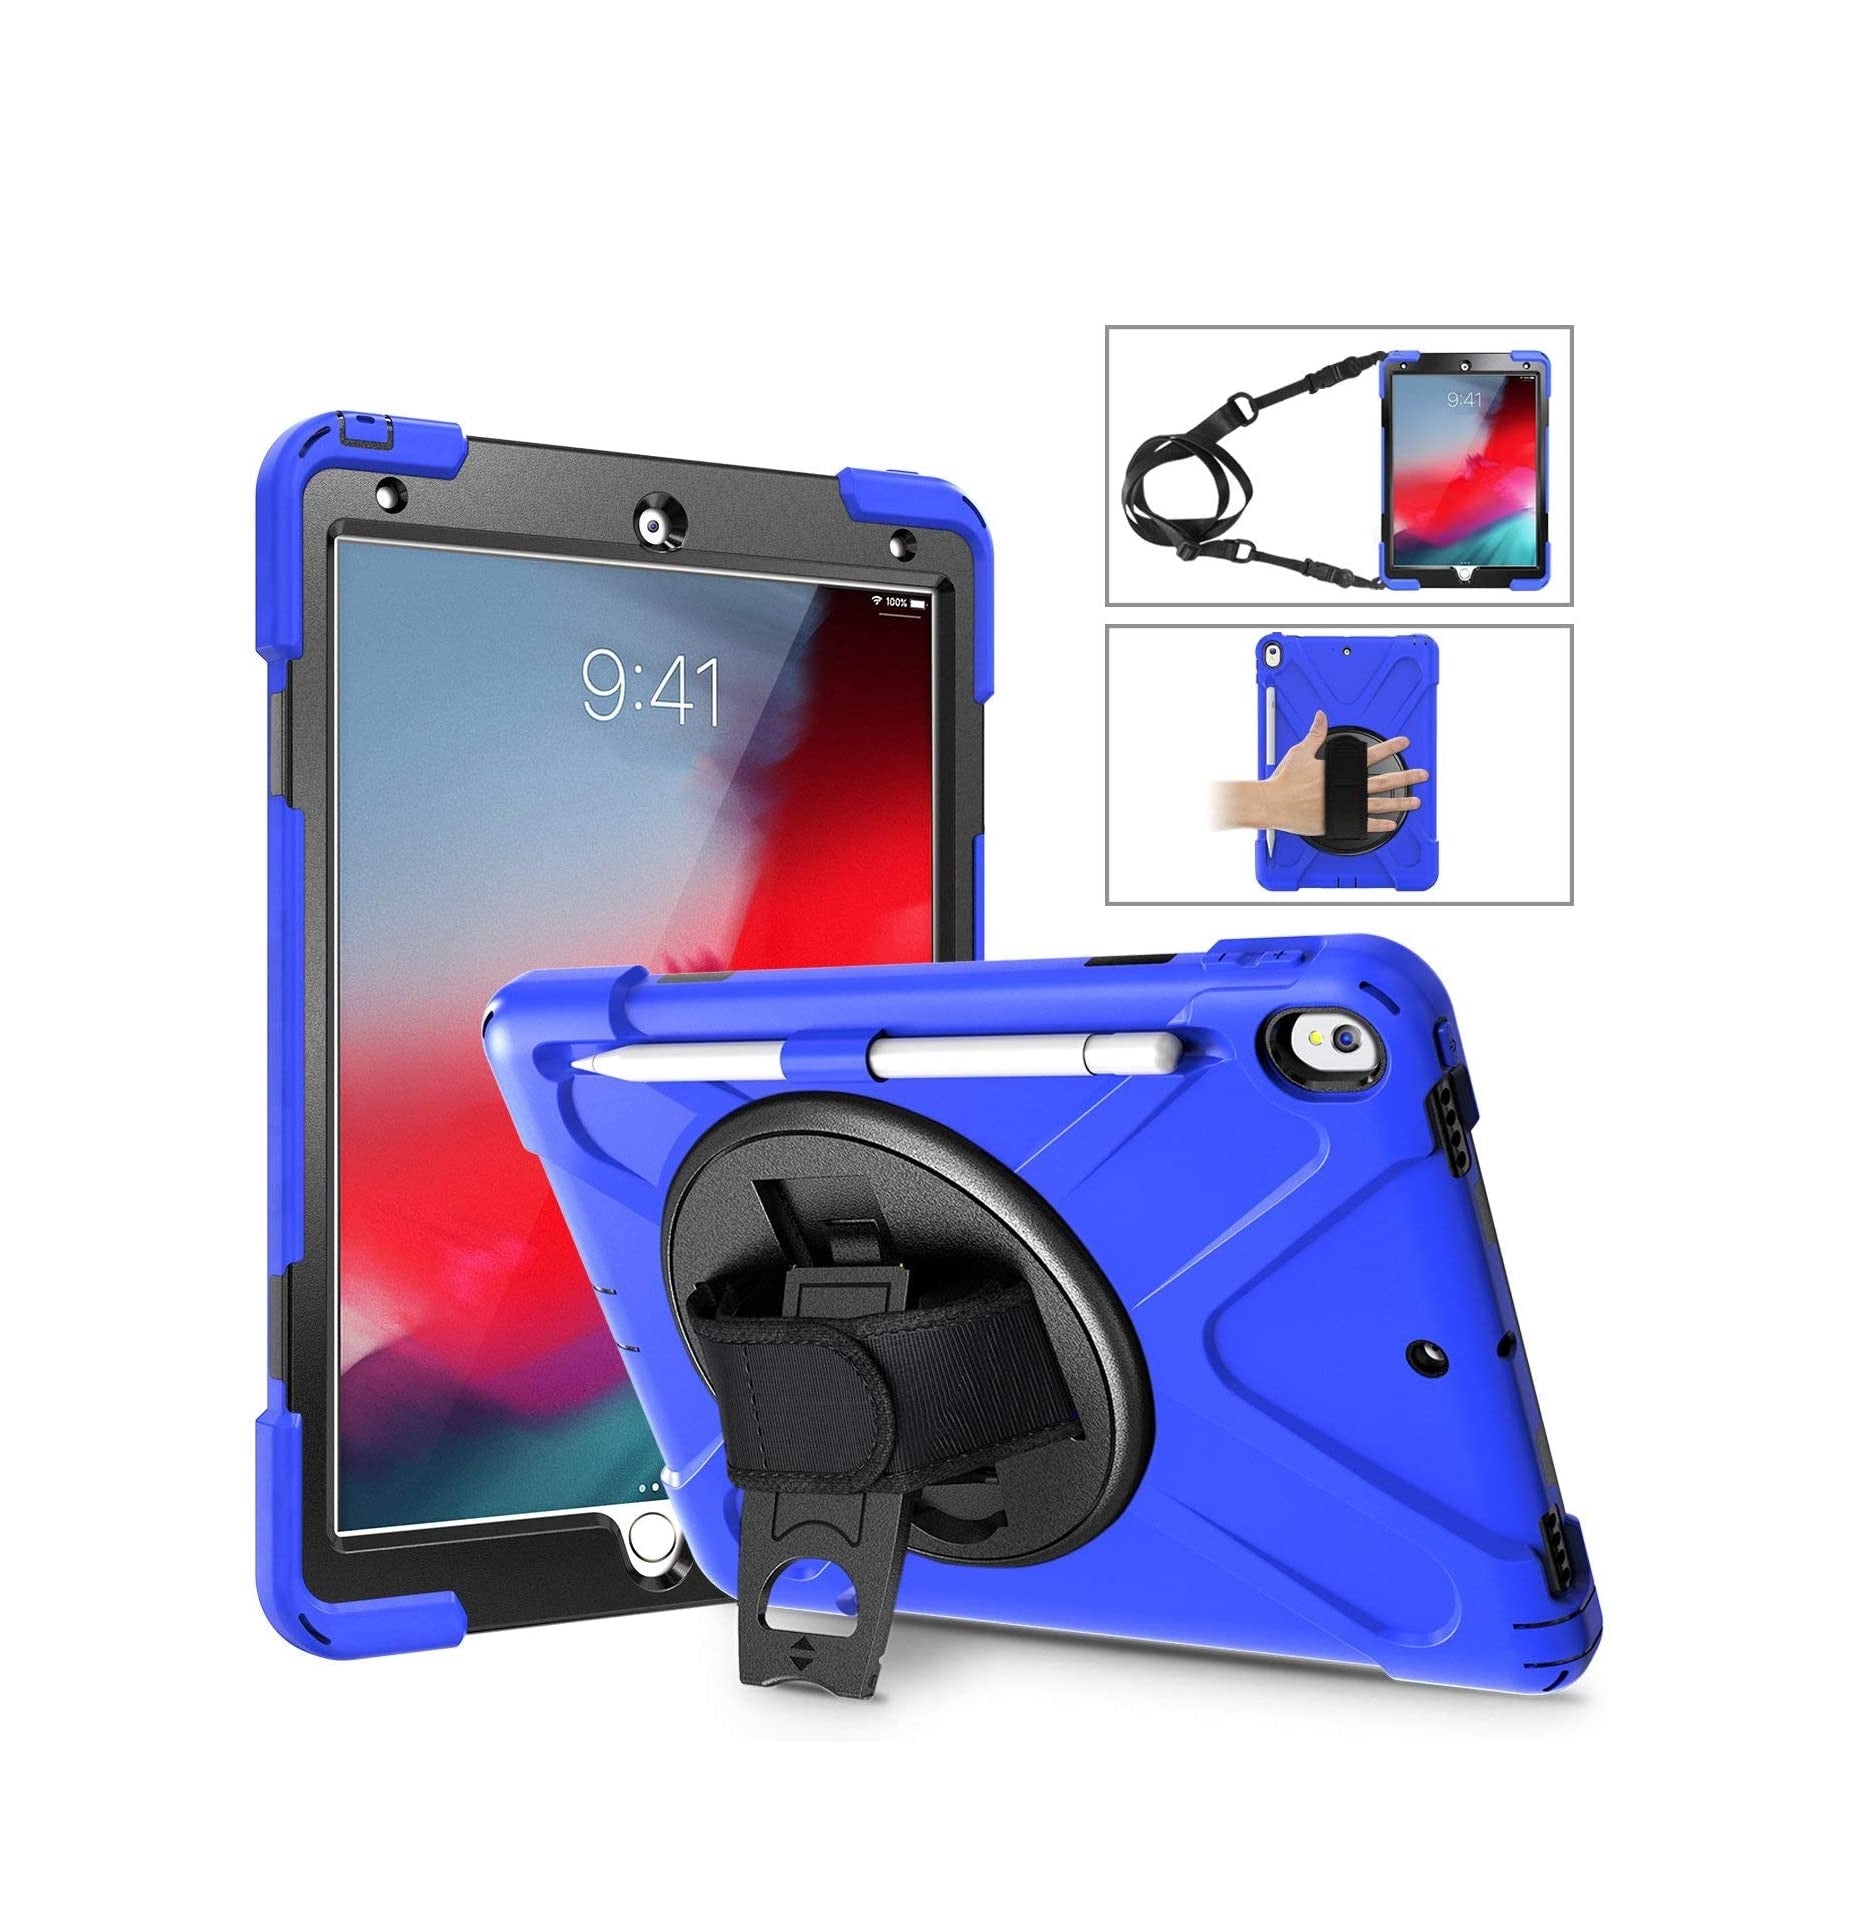 https://caserace.net/products/rugged-heavy-duty-cover-for-ipad-air-10-5-10-5-pro-with-strap-and-pencil-holder-blue